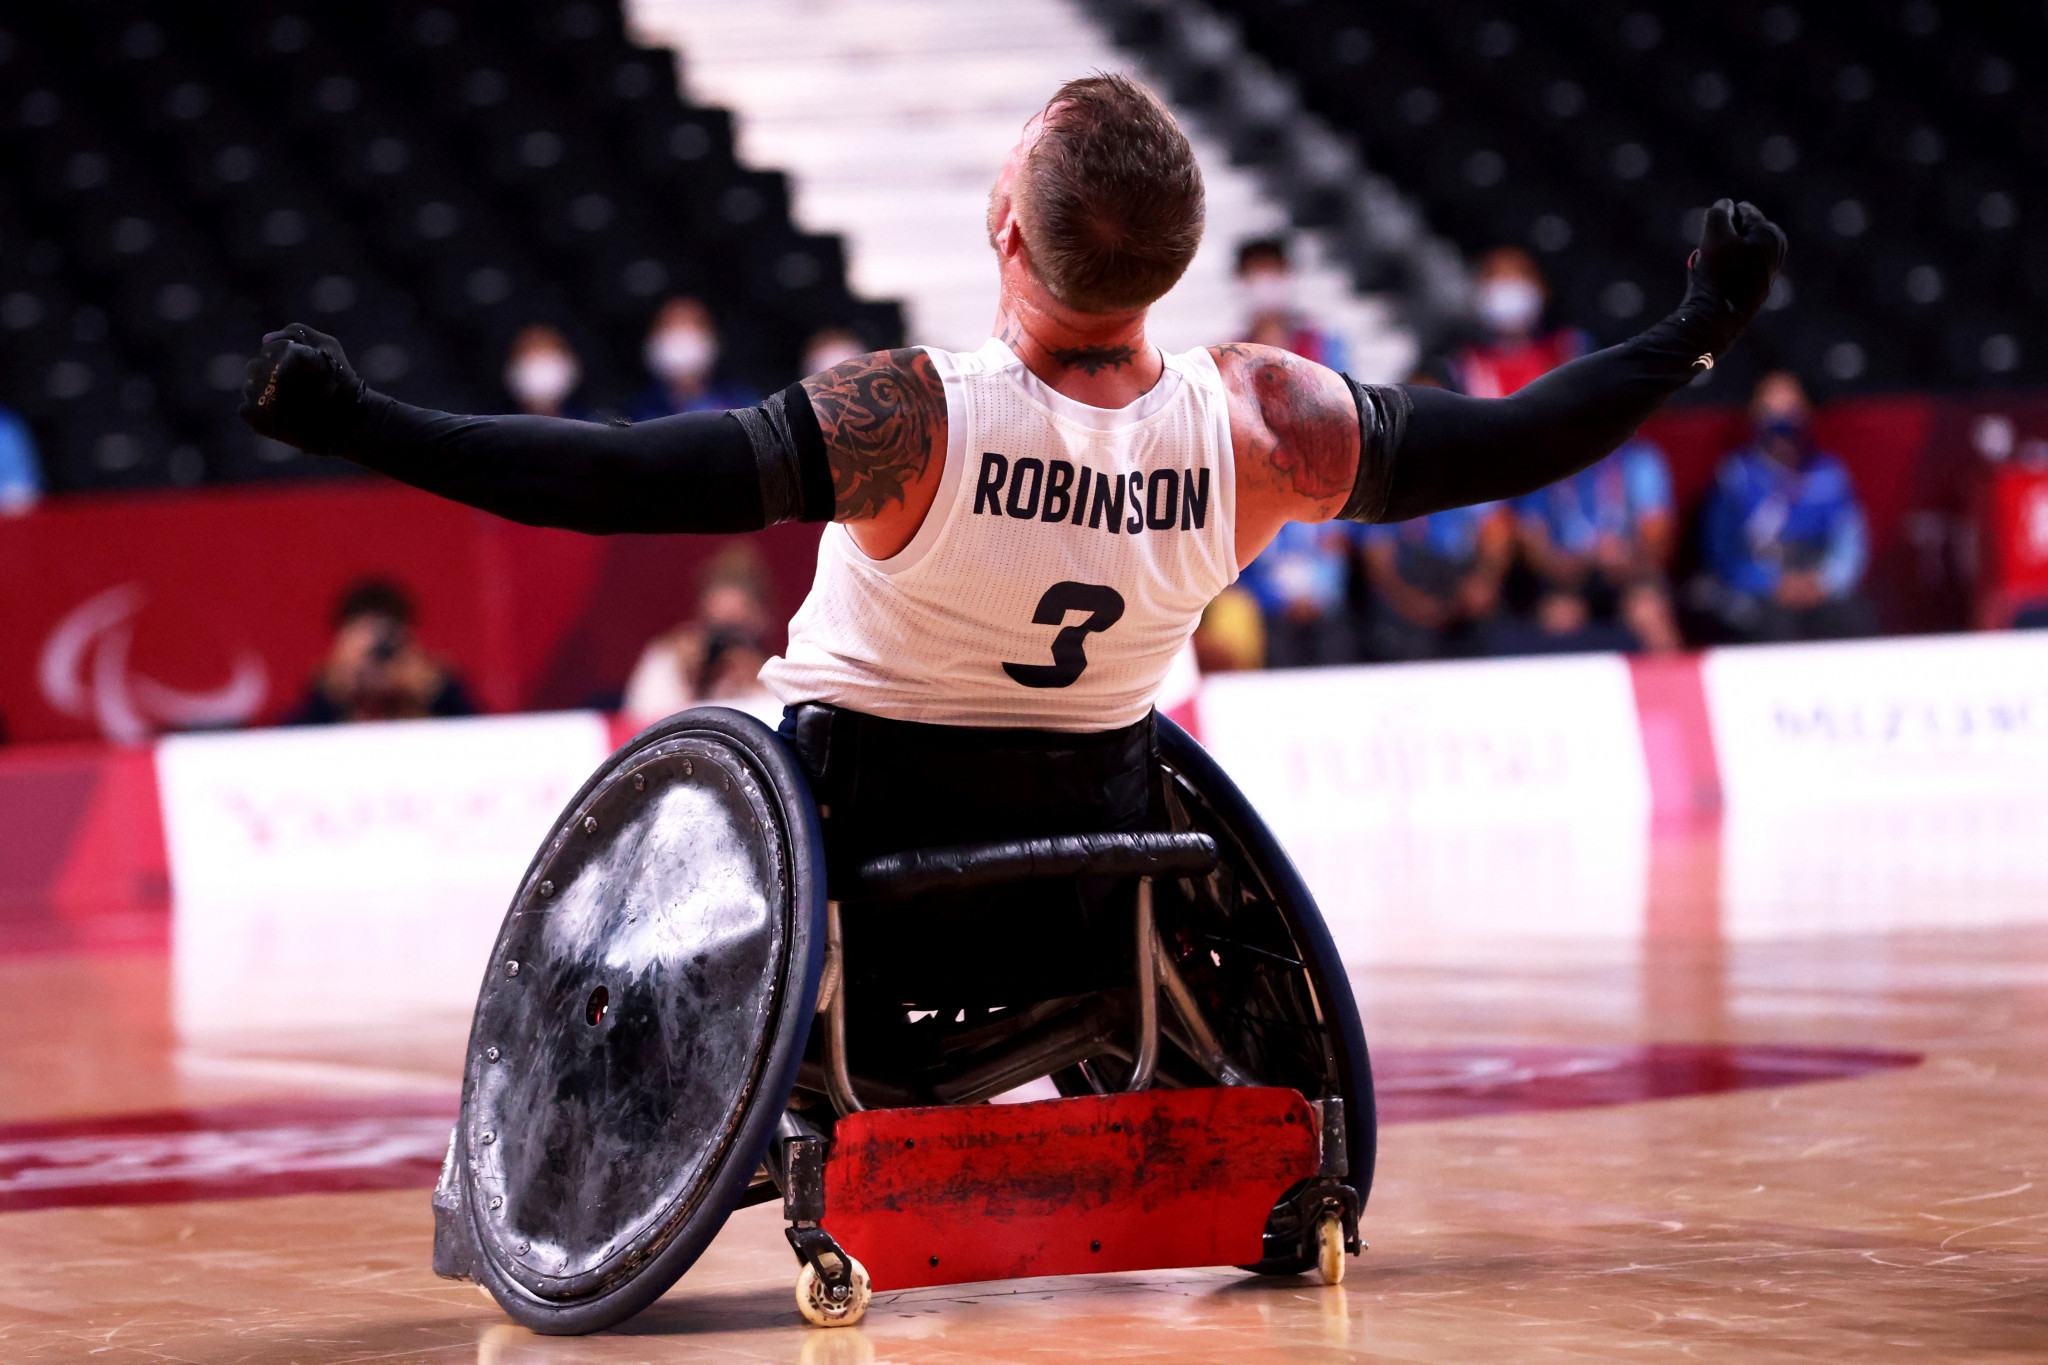 Britain and France progress to semi-finals at Wheelchair Rugby European Championship